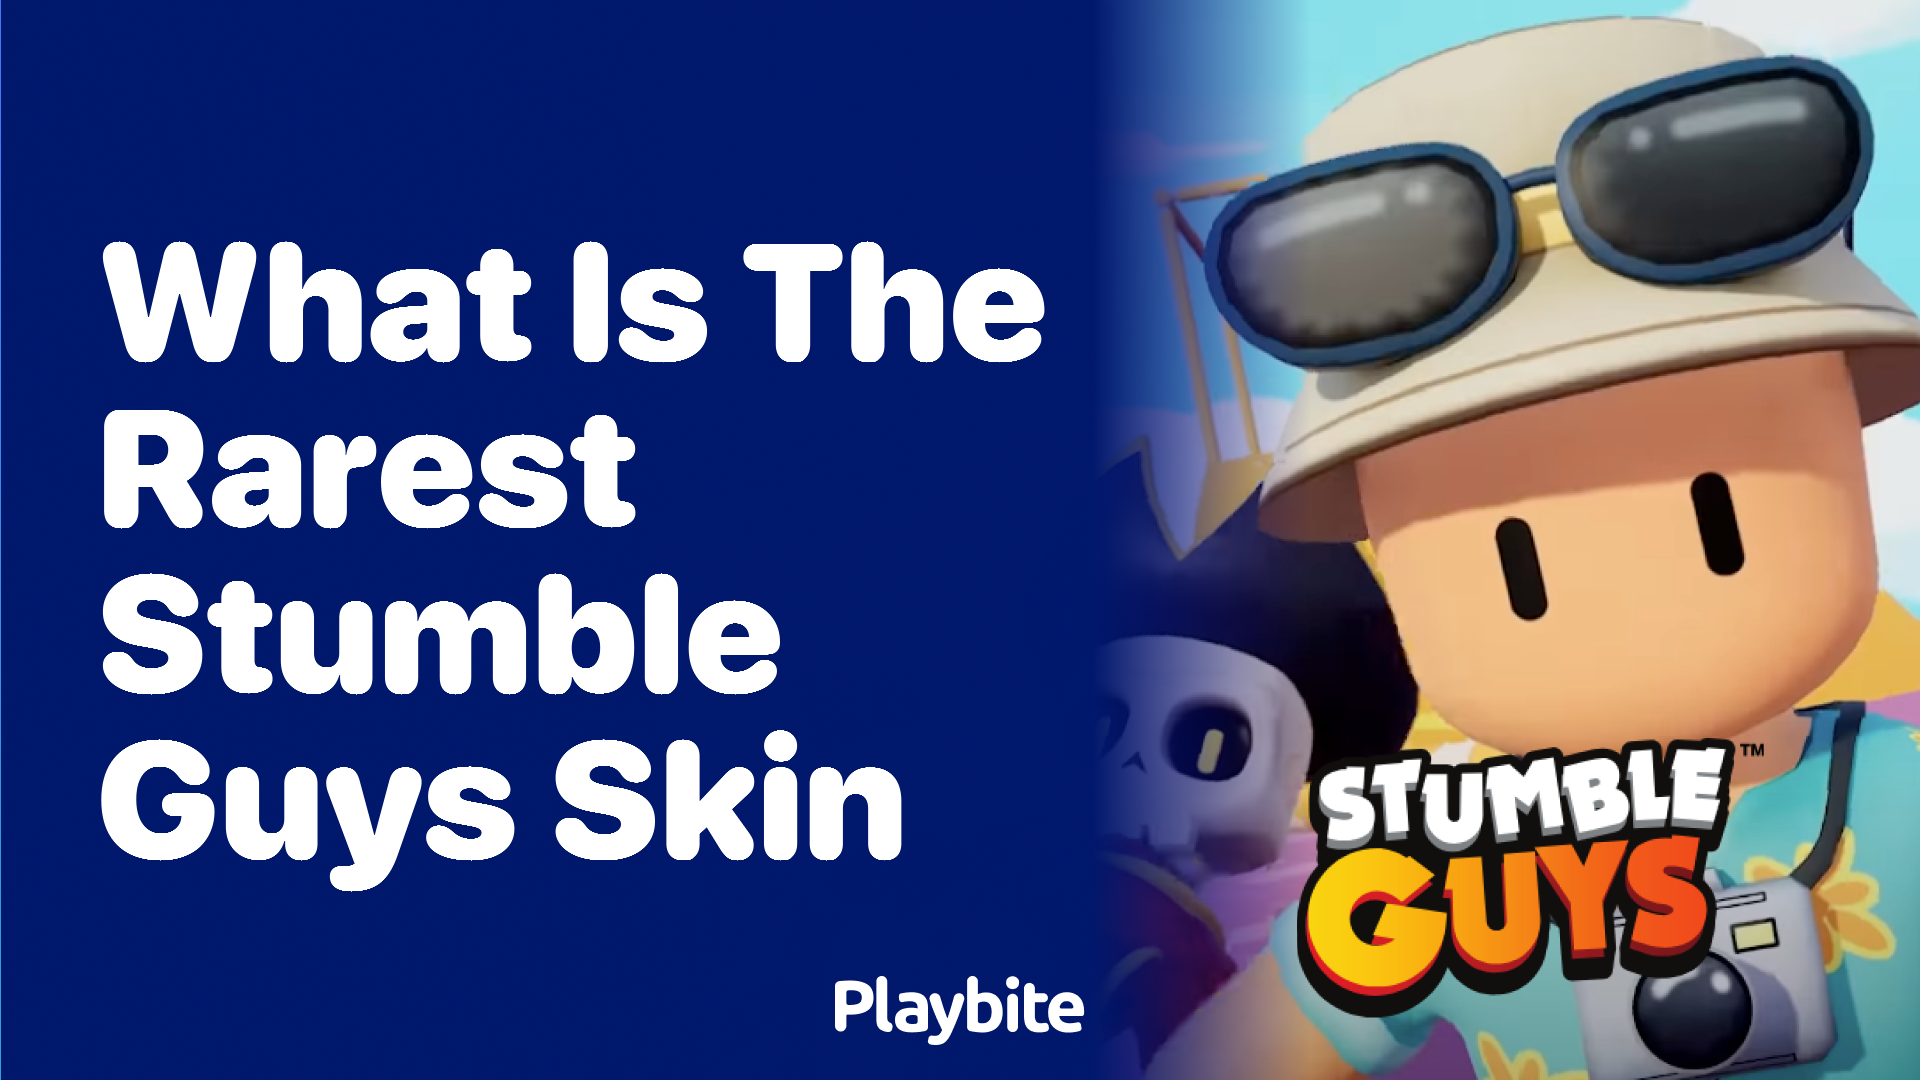 What is the Rarest Stumble Guys Skin?